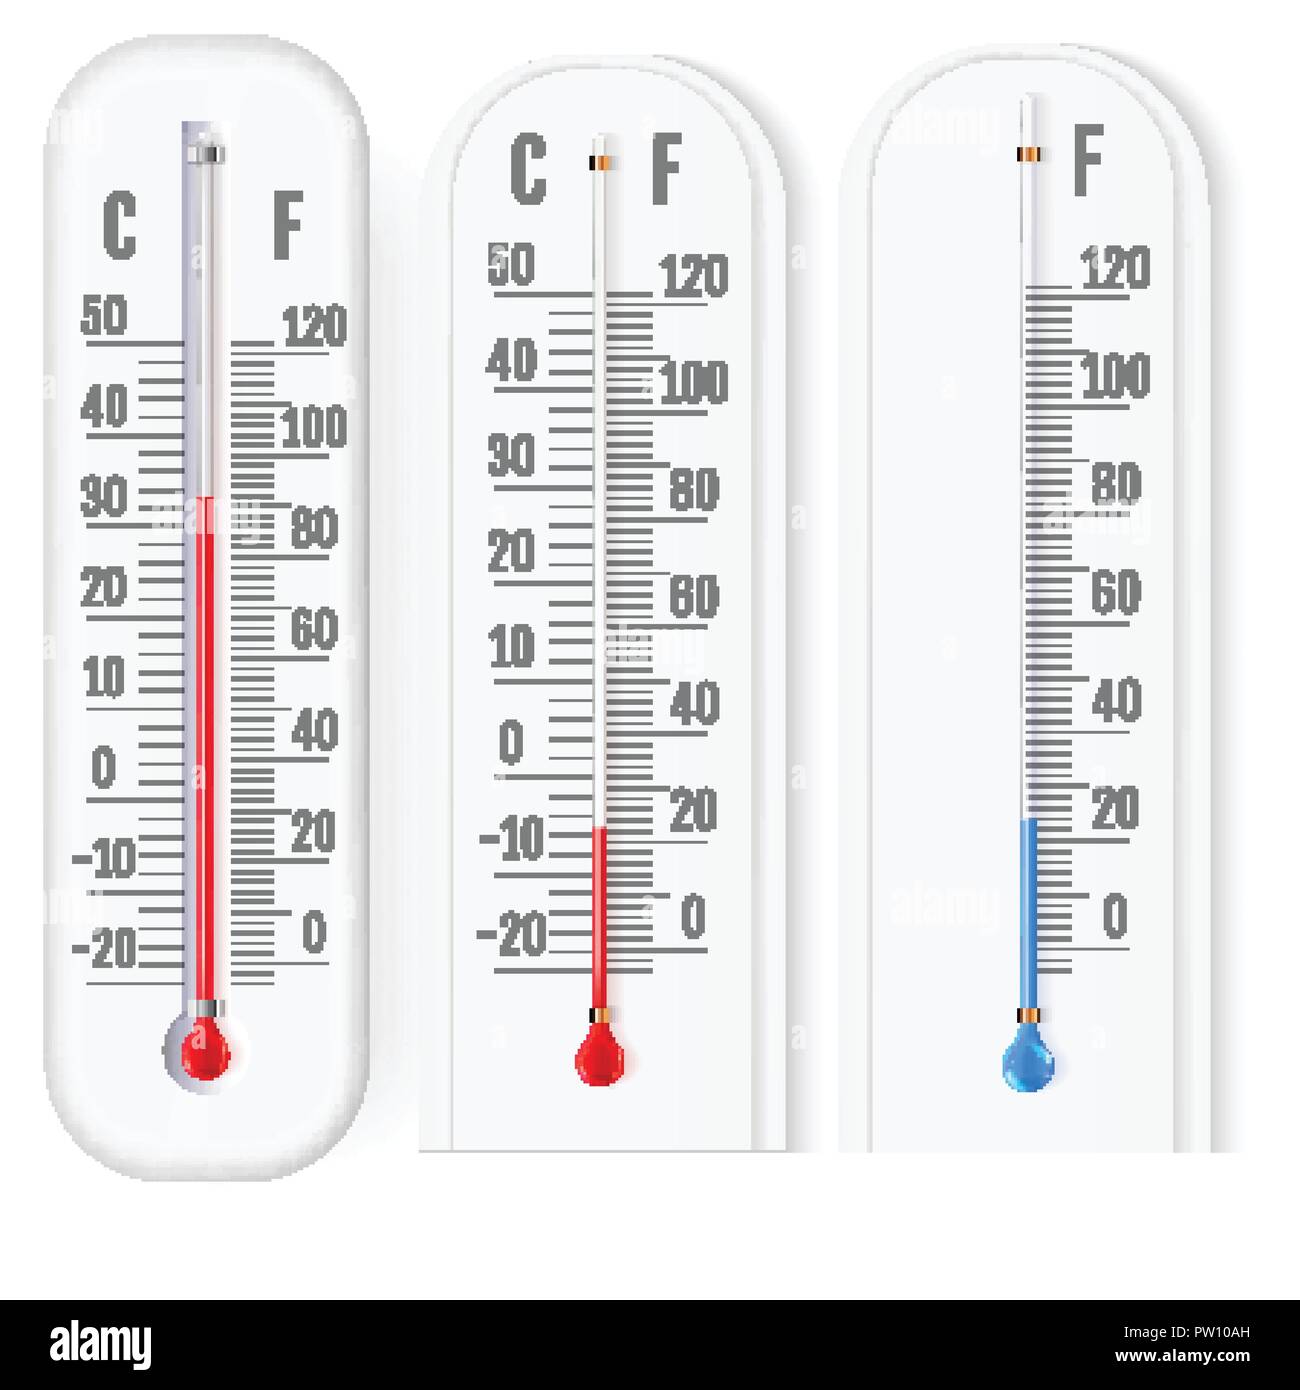 https://c8.alamy.com/comp/PW10AH/classic-outdoor-and-indoor-fahrenheit-and-celsius-thermometers-set-for-meteorological-measurements-realistic-vector-illustration-PW10AH.jpg